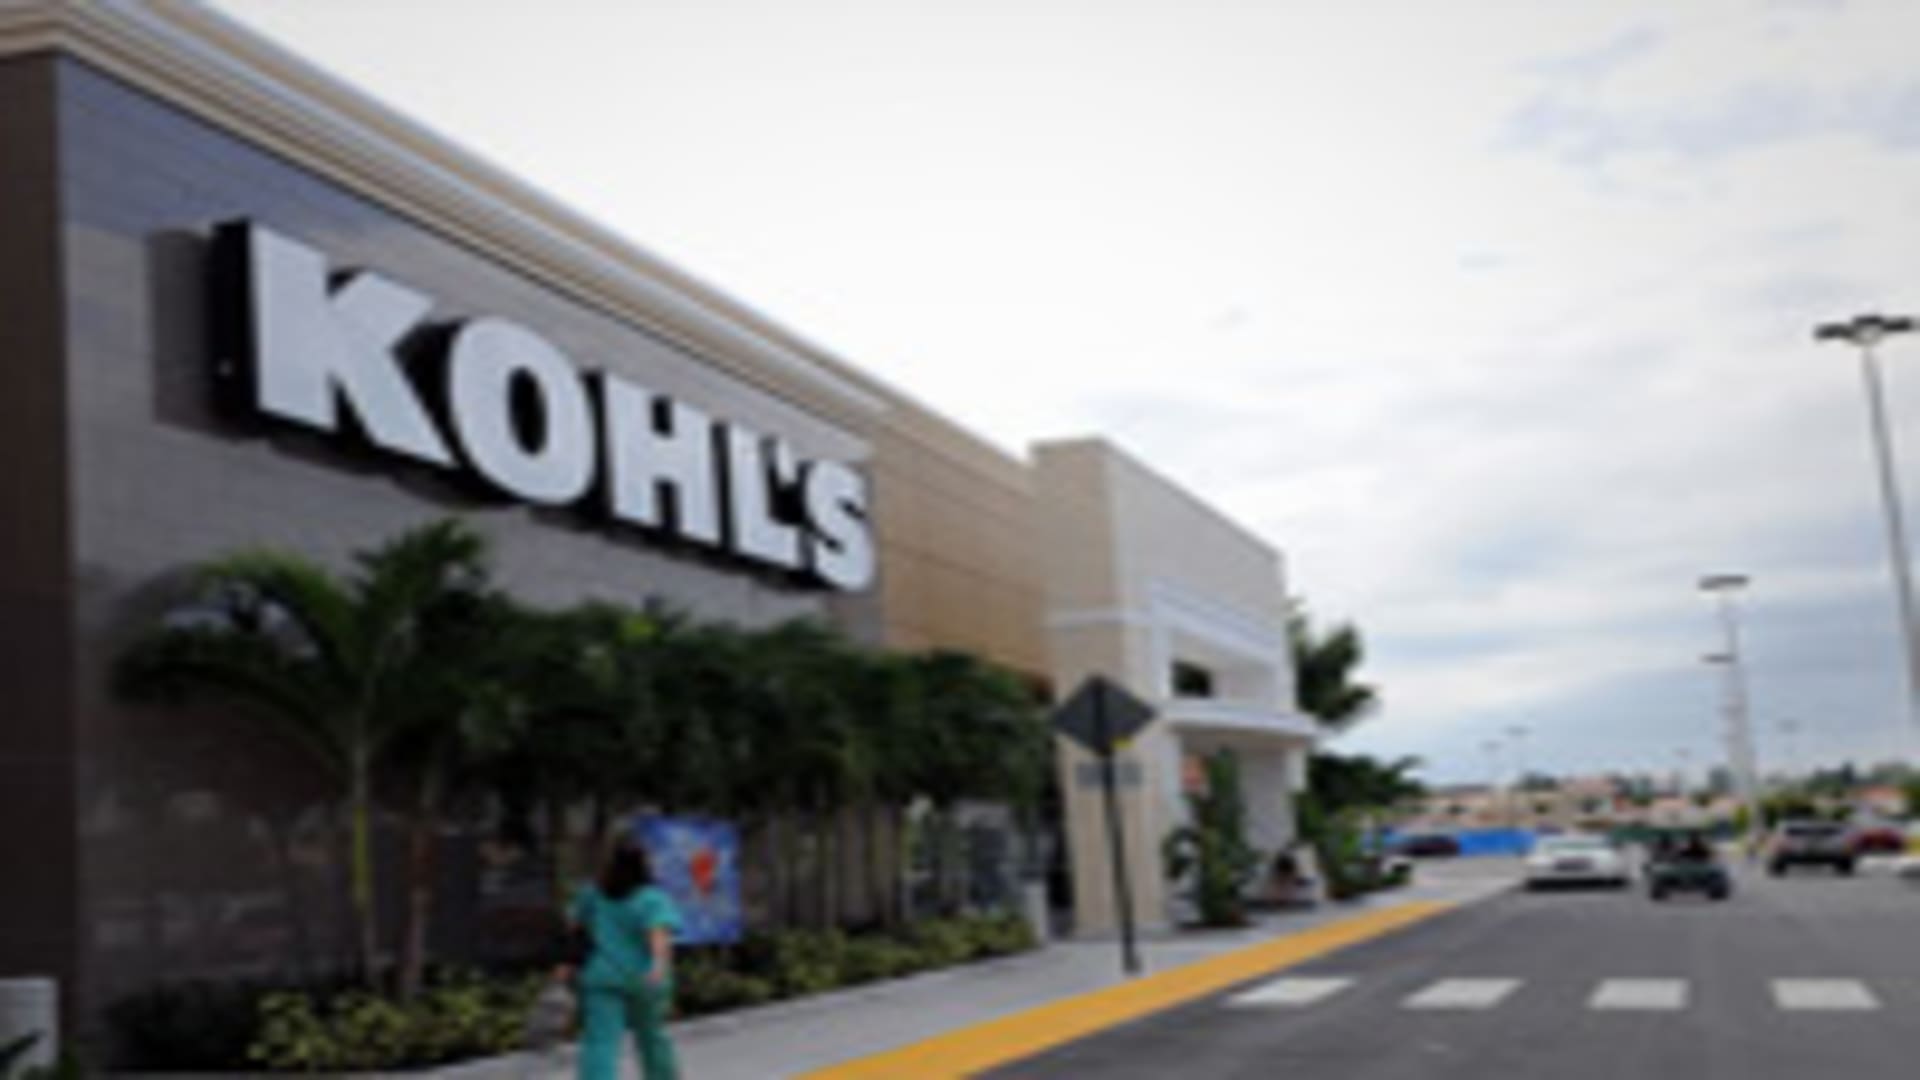 Kohl's Card review: Restrictive rewards and few benefits - CNBC